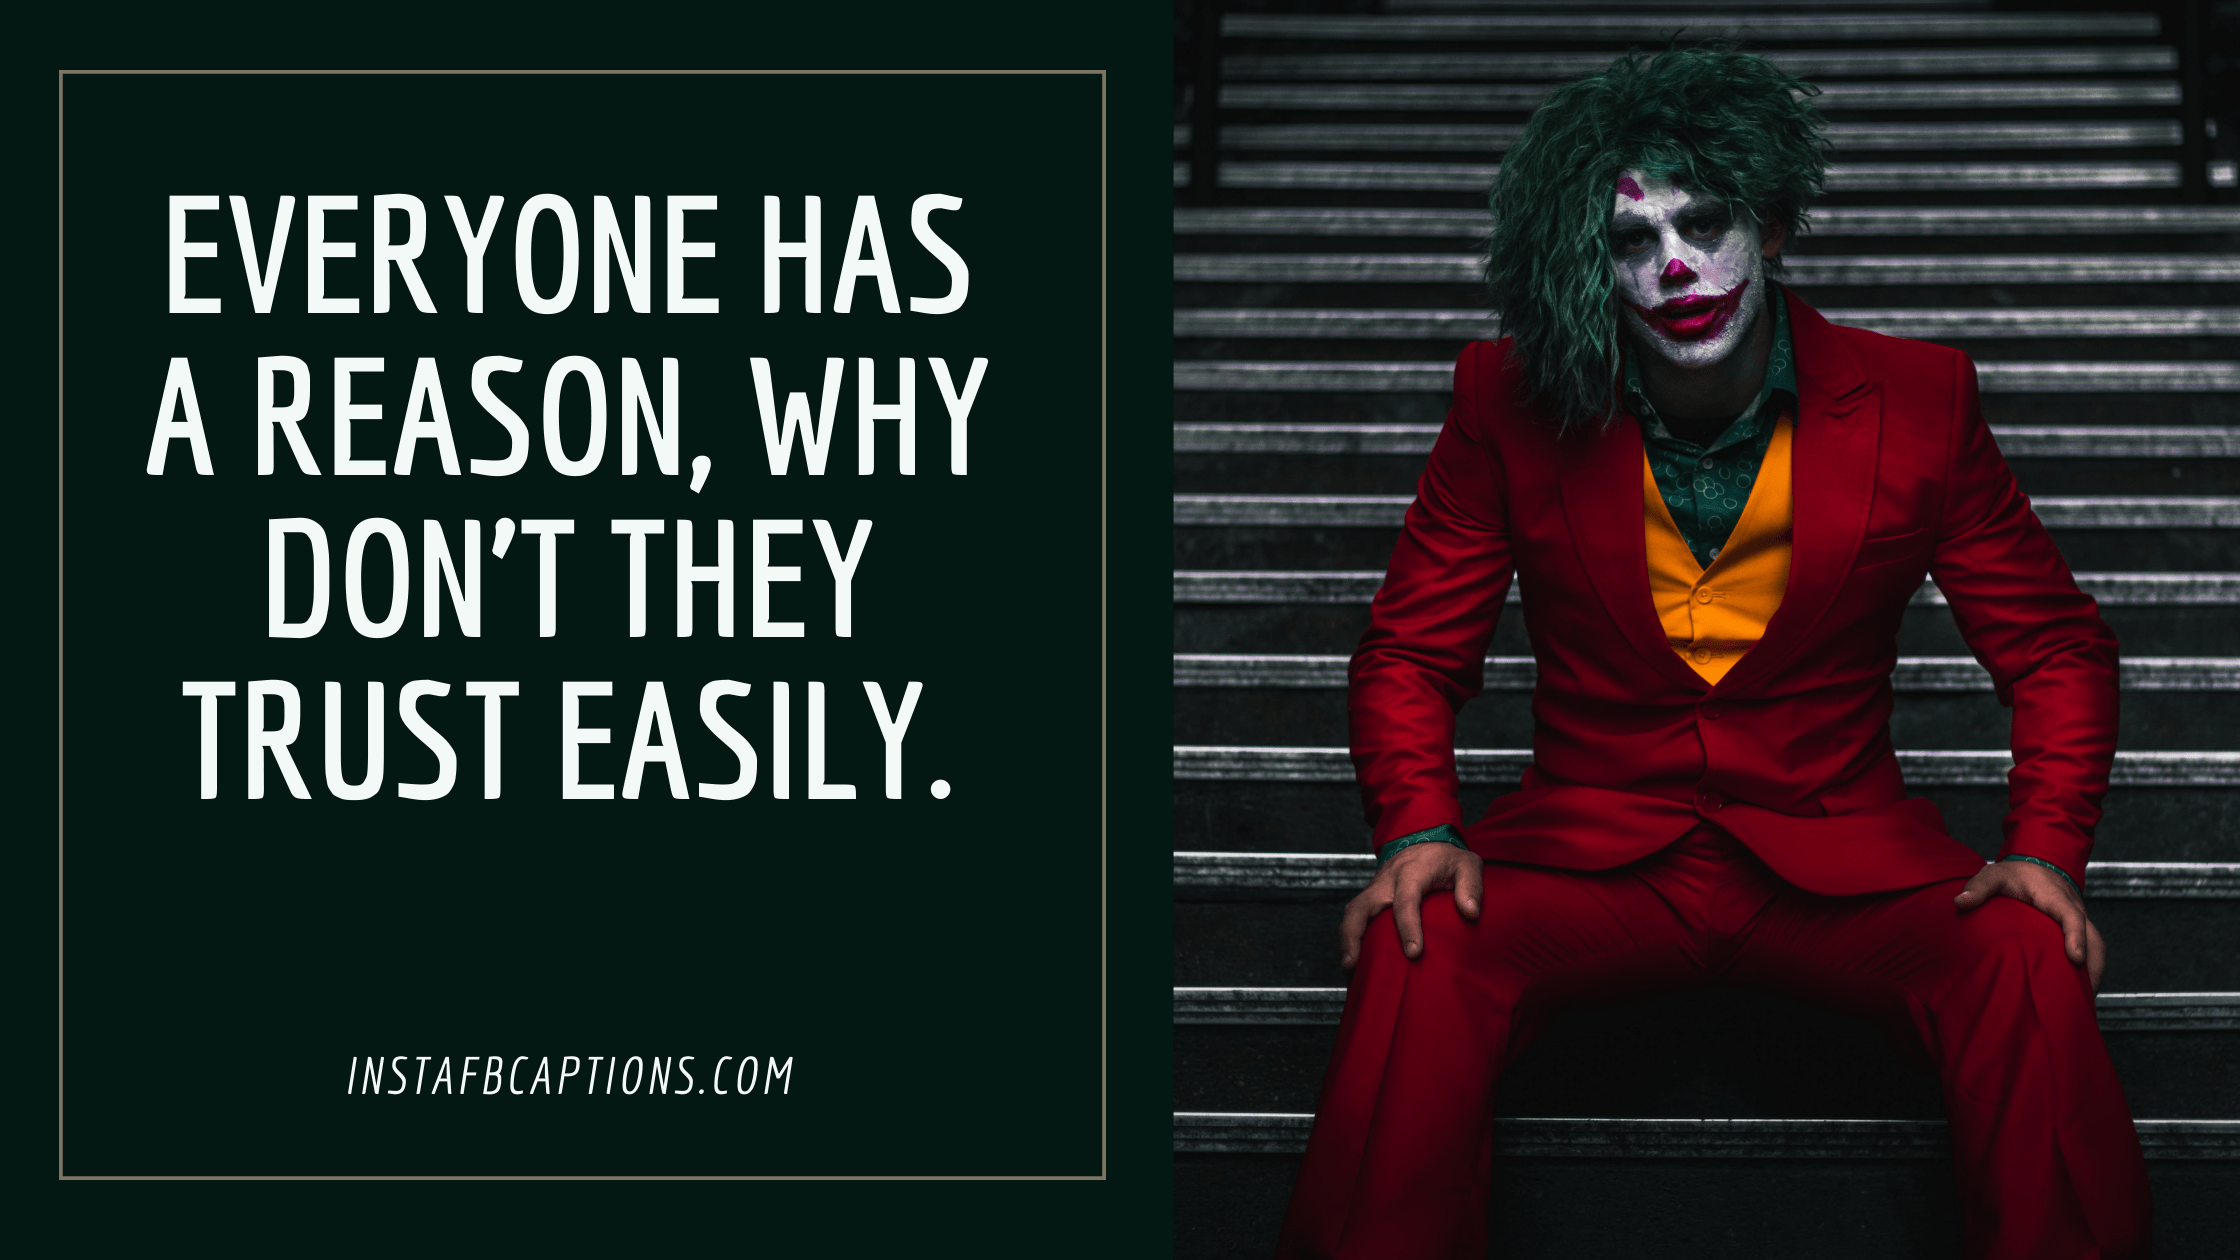 Attitude Joker Quotes  - Attitude Joker Quotes  - 94 JOKER Instagram Captions Quotes Hashtags in 2022